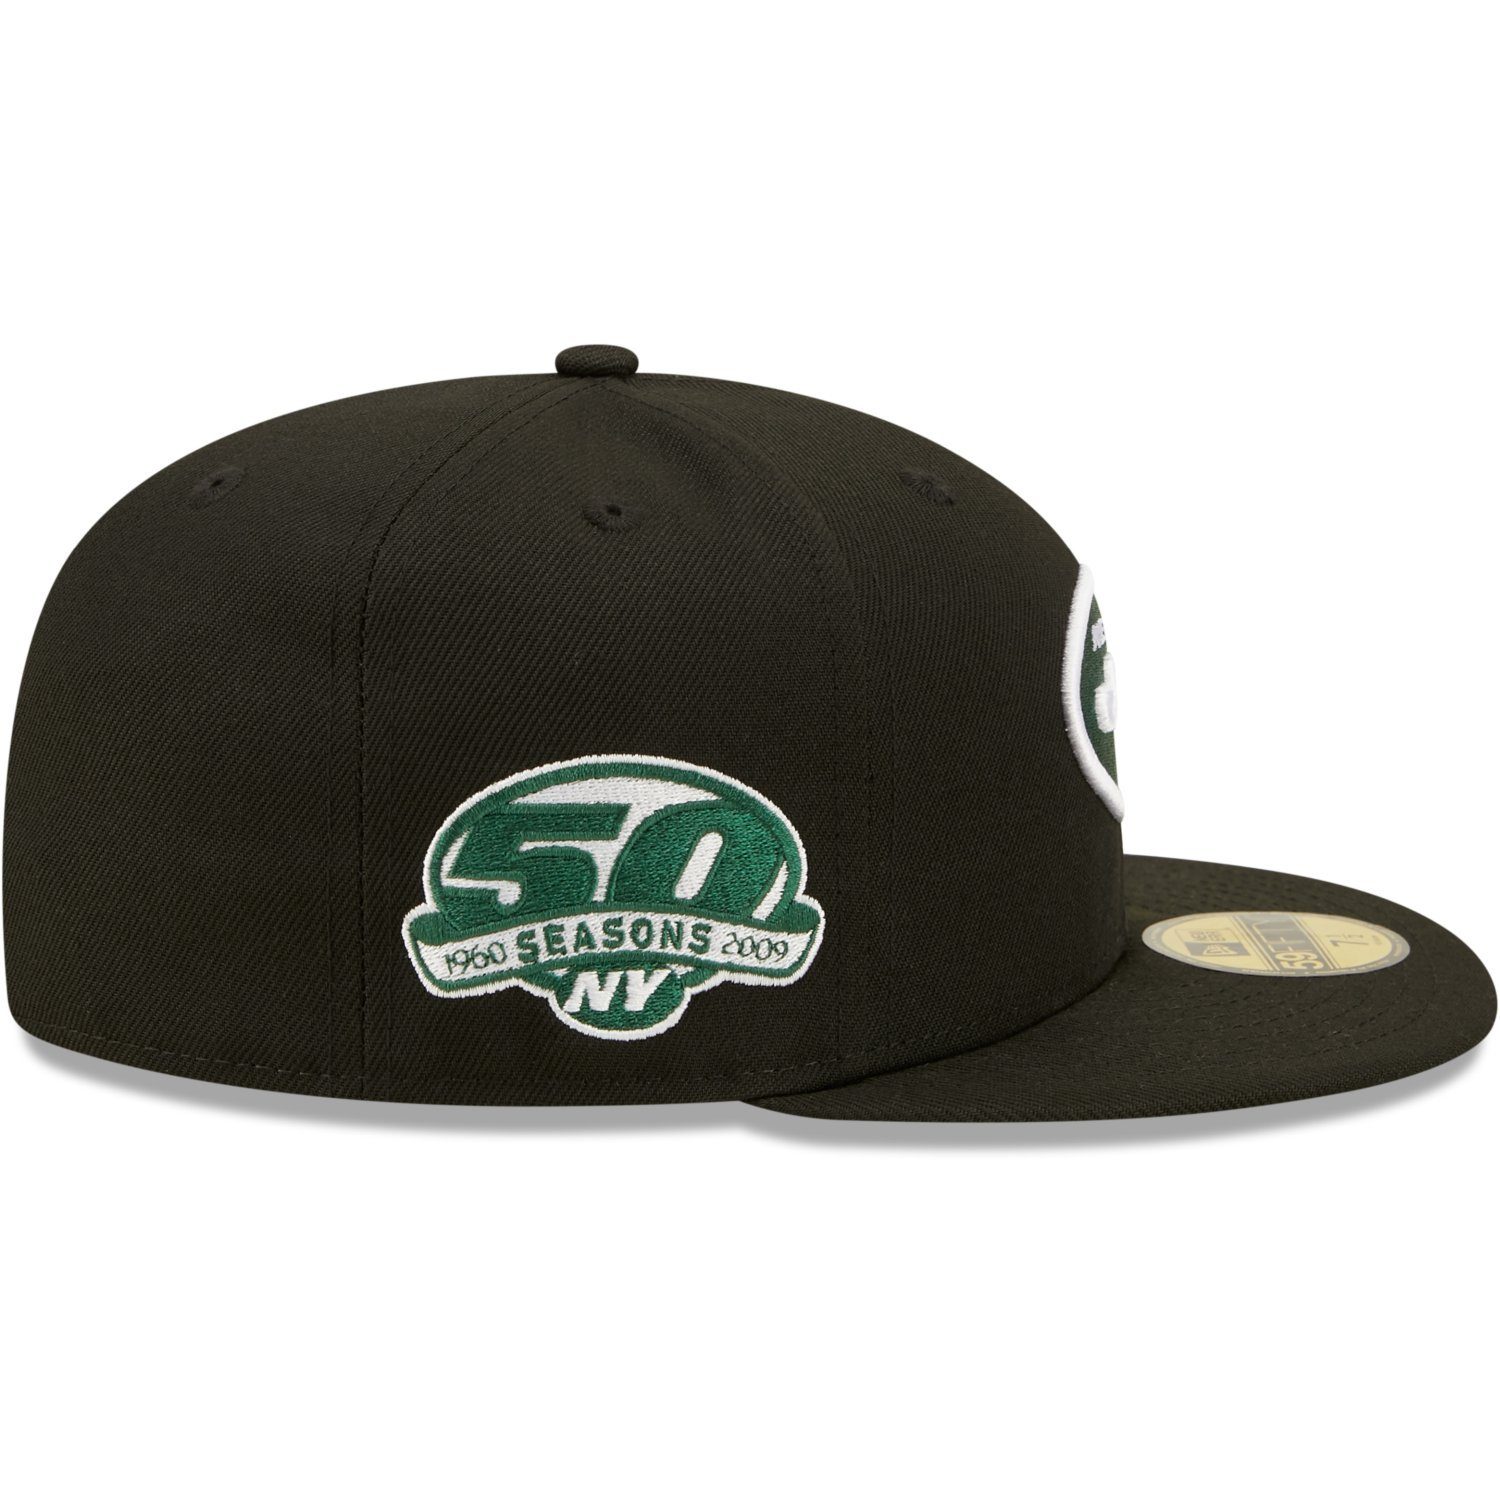 New Era Fitted Cap New Jets Seasons 50 York 59Fifty